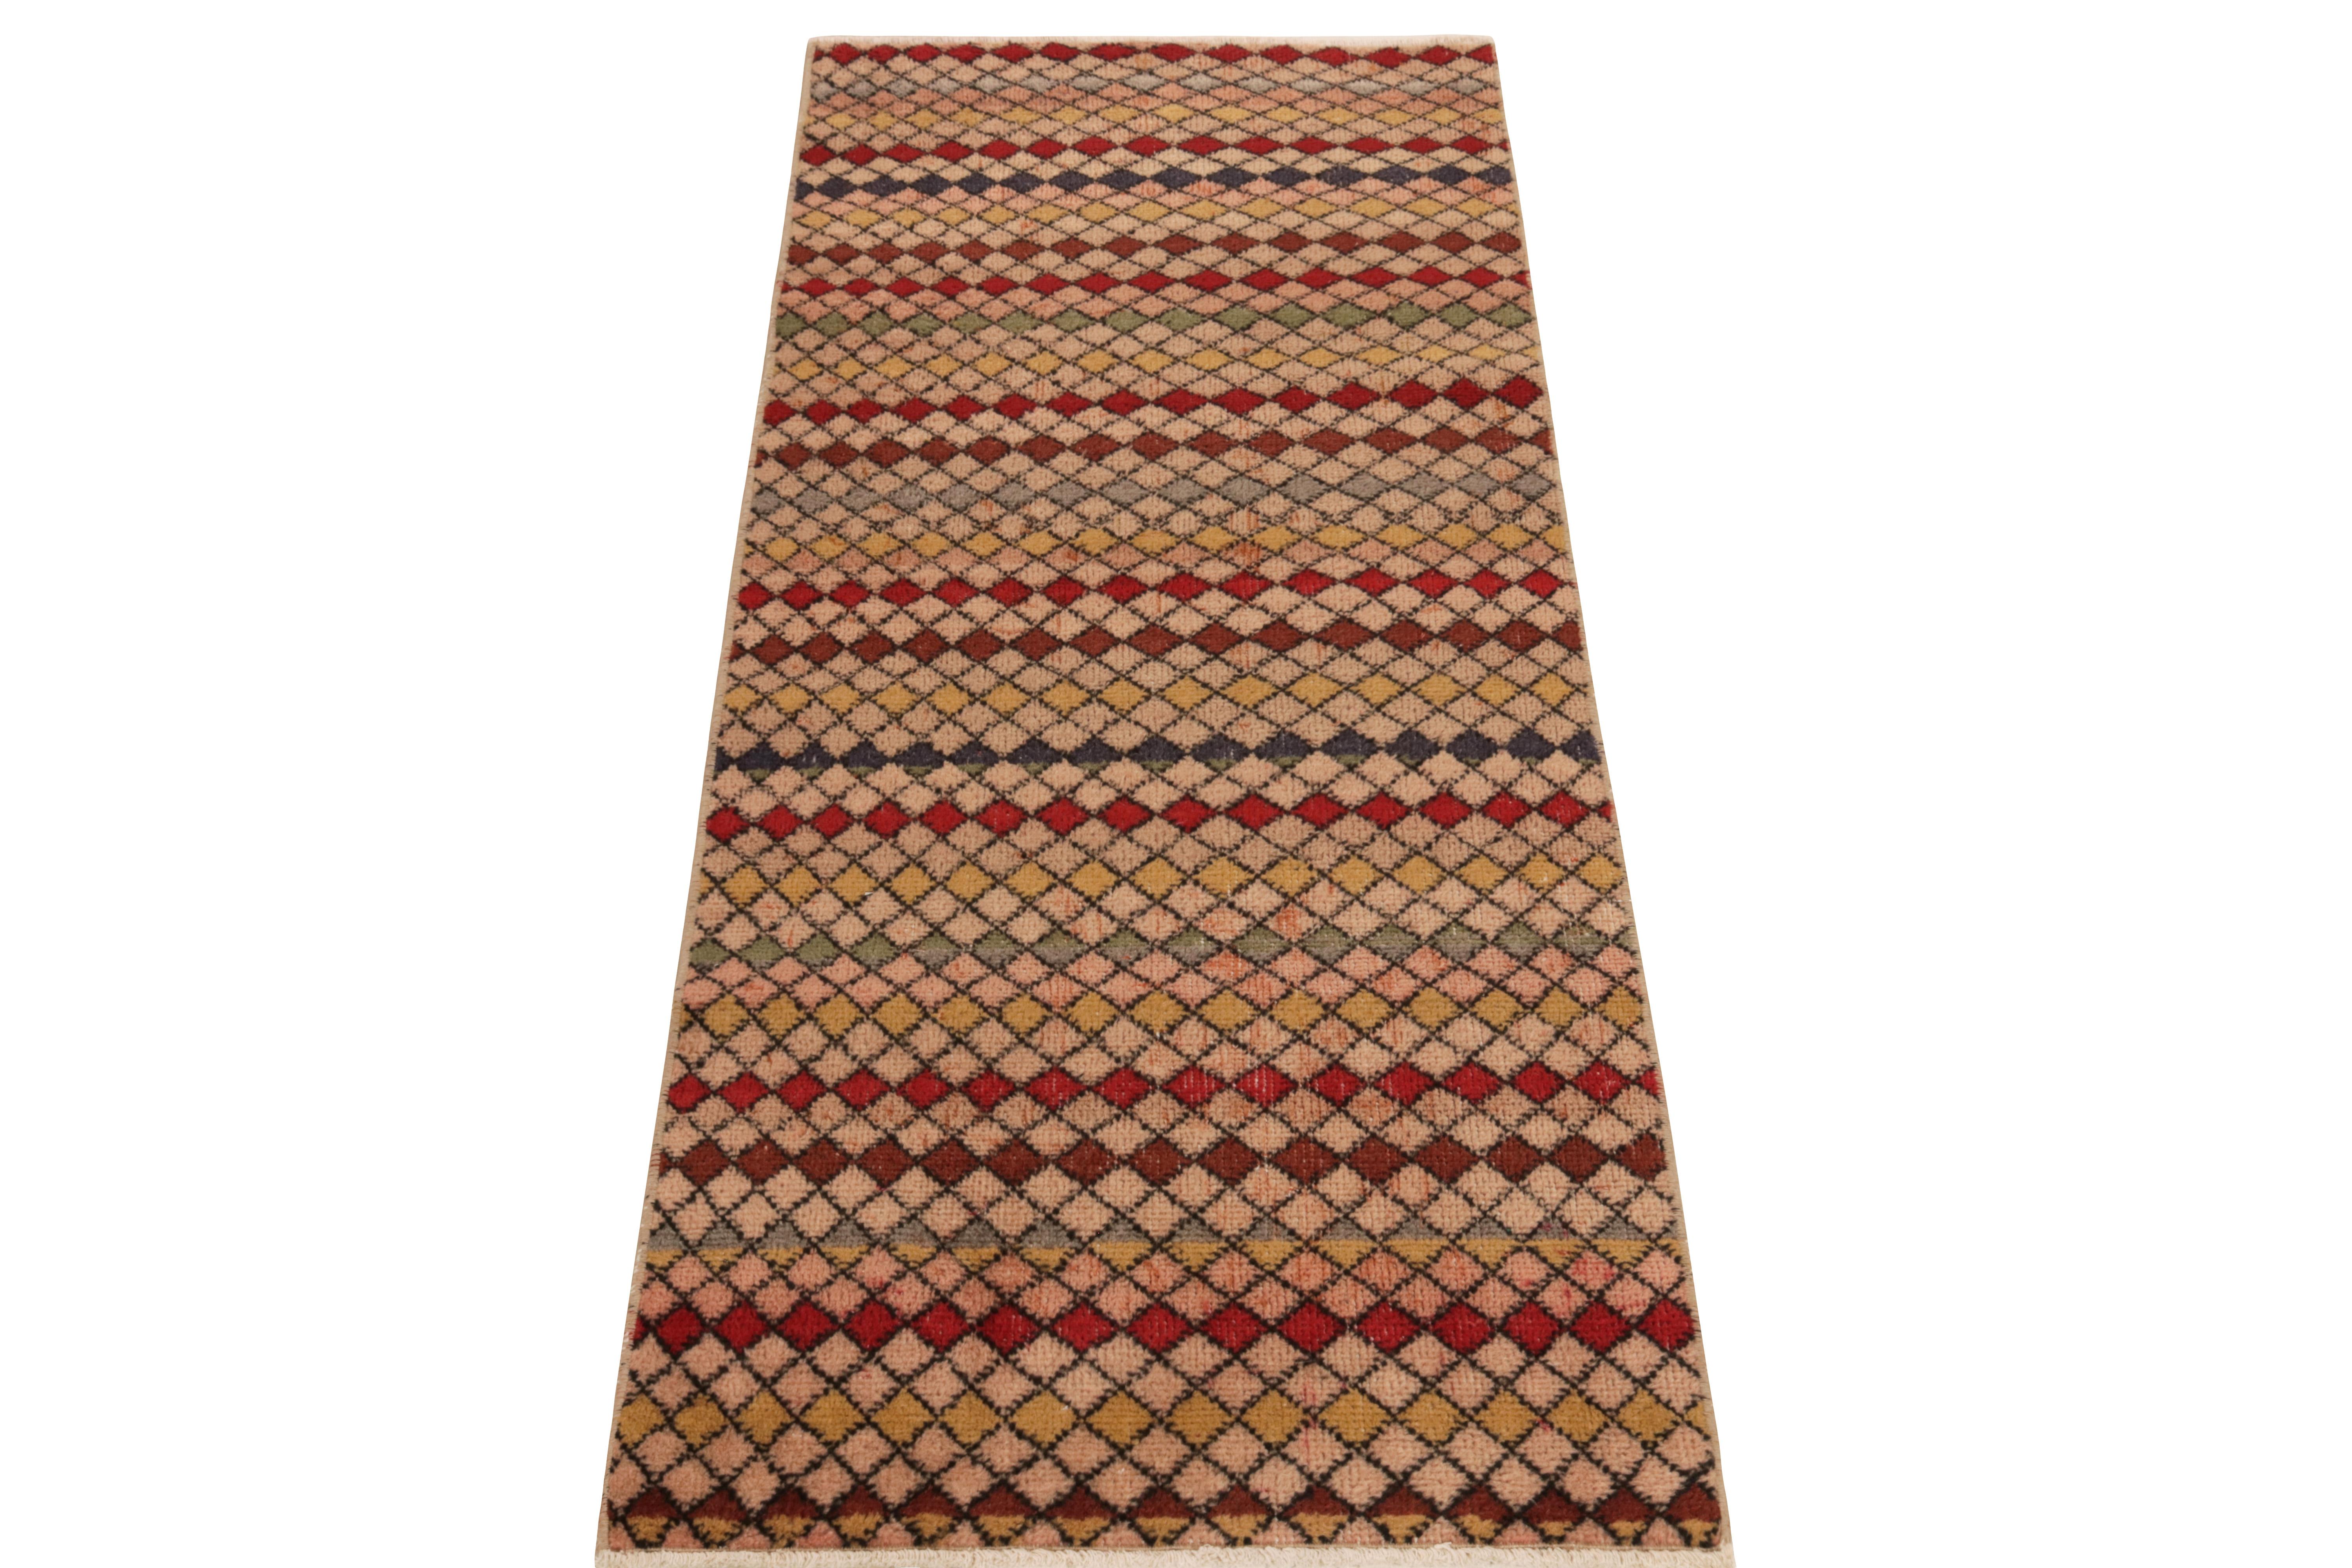 From Rug & Kilim’s Mid-Century Pasha collection, a 1960s vintage runner celebrating the works of a bold multidisciplinary designer from Turkey. 

Hand-knotted in wool, this 2x6 rug revels in a scintillating diamond pattern that lends an